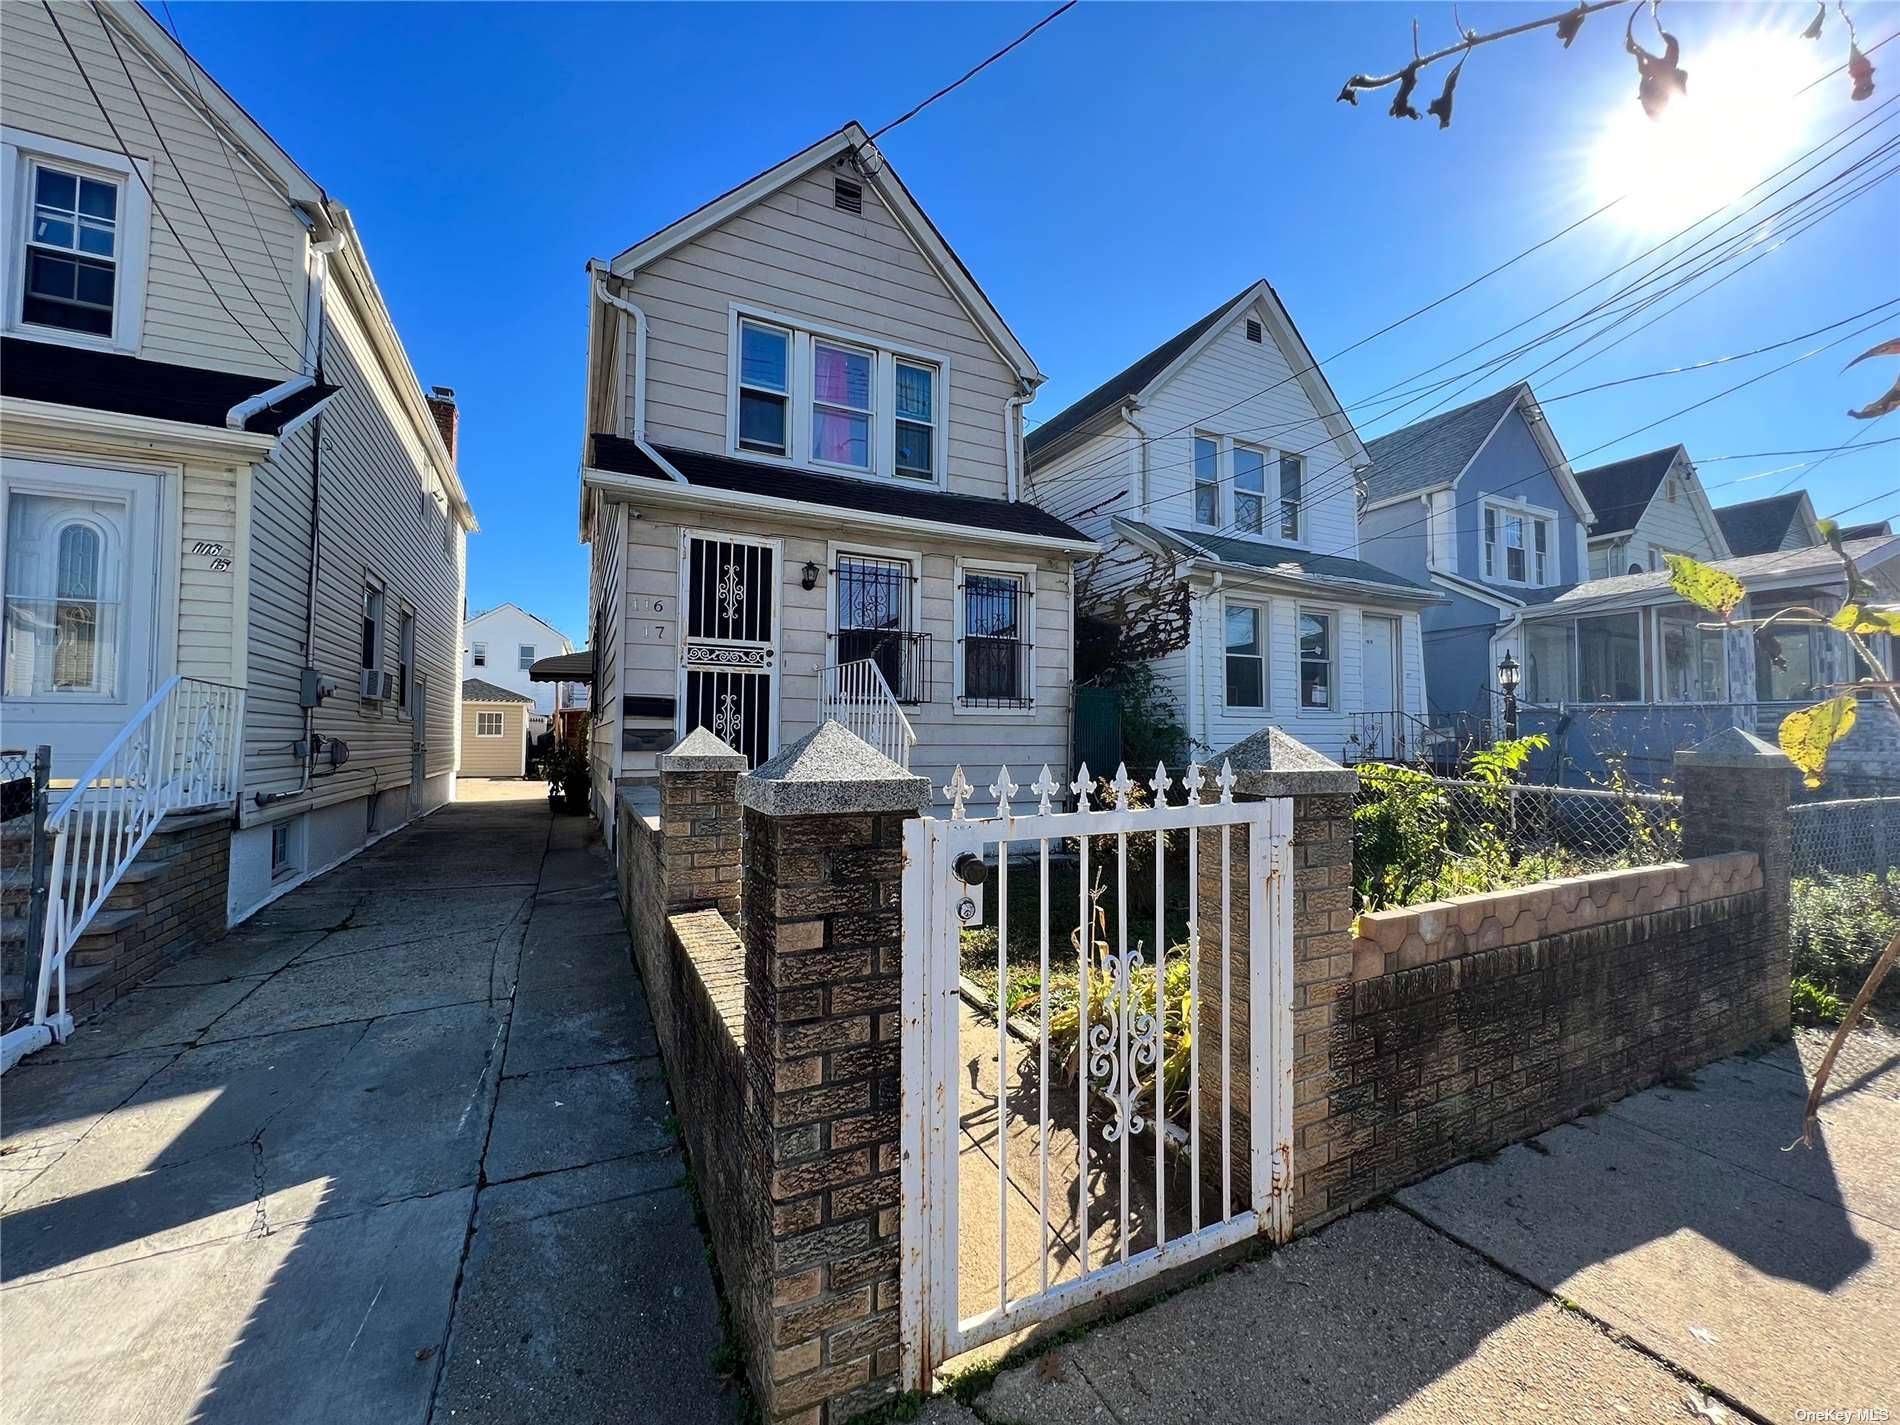 Beautiful 1 Family located close to highways, JFK, Shopping and more.